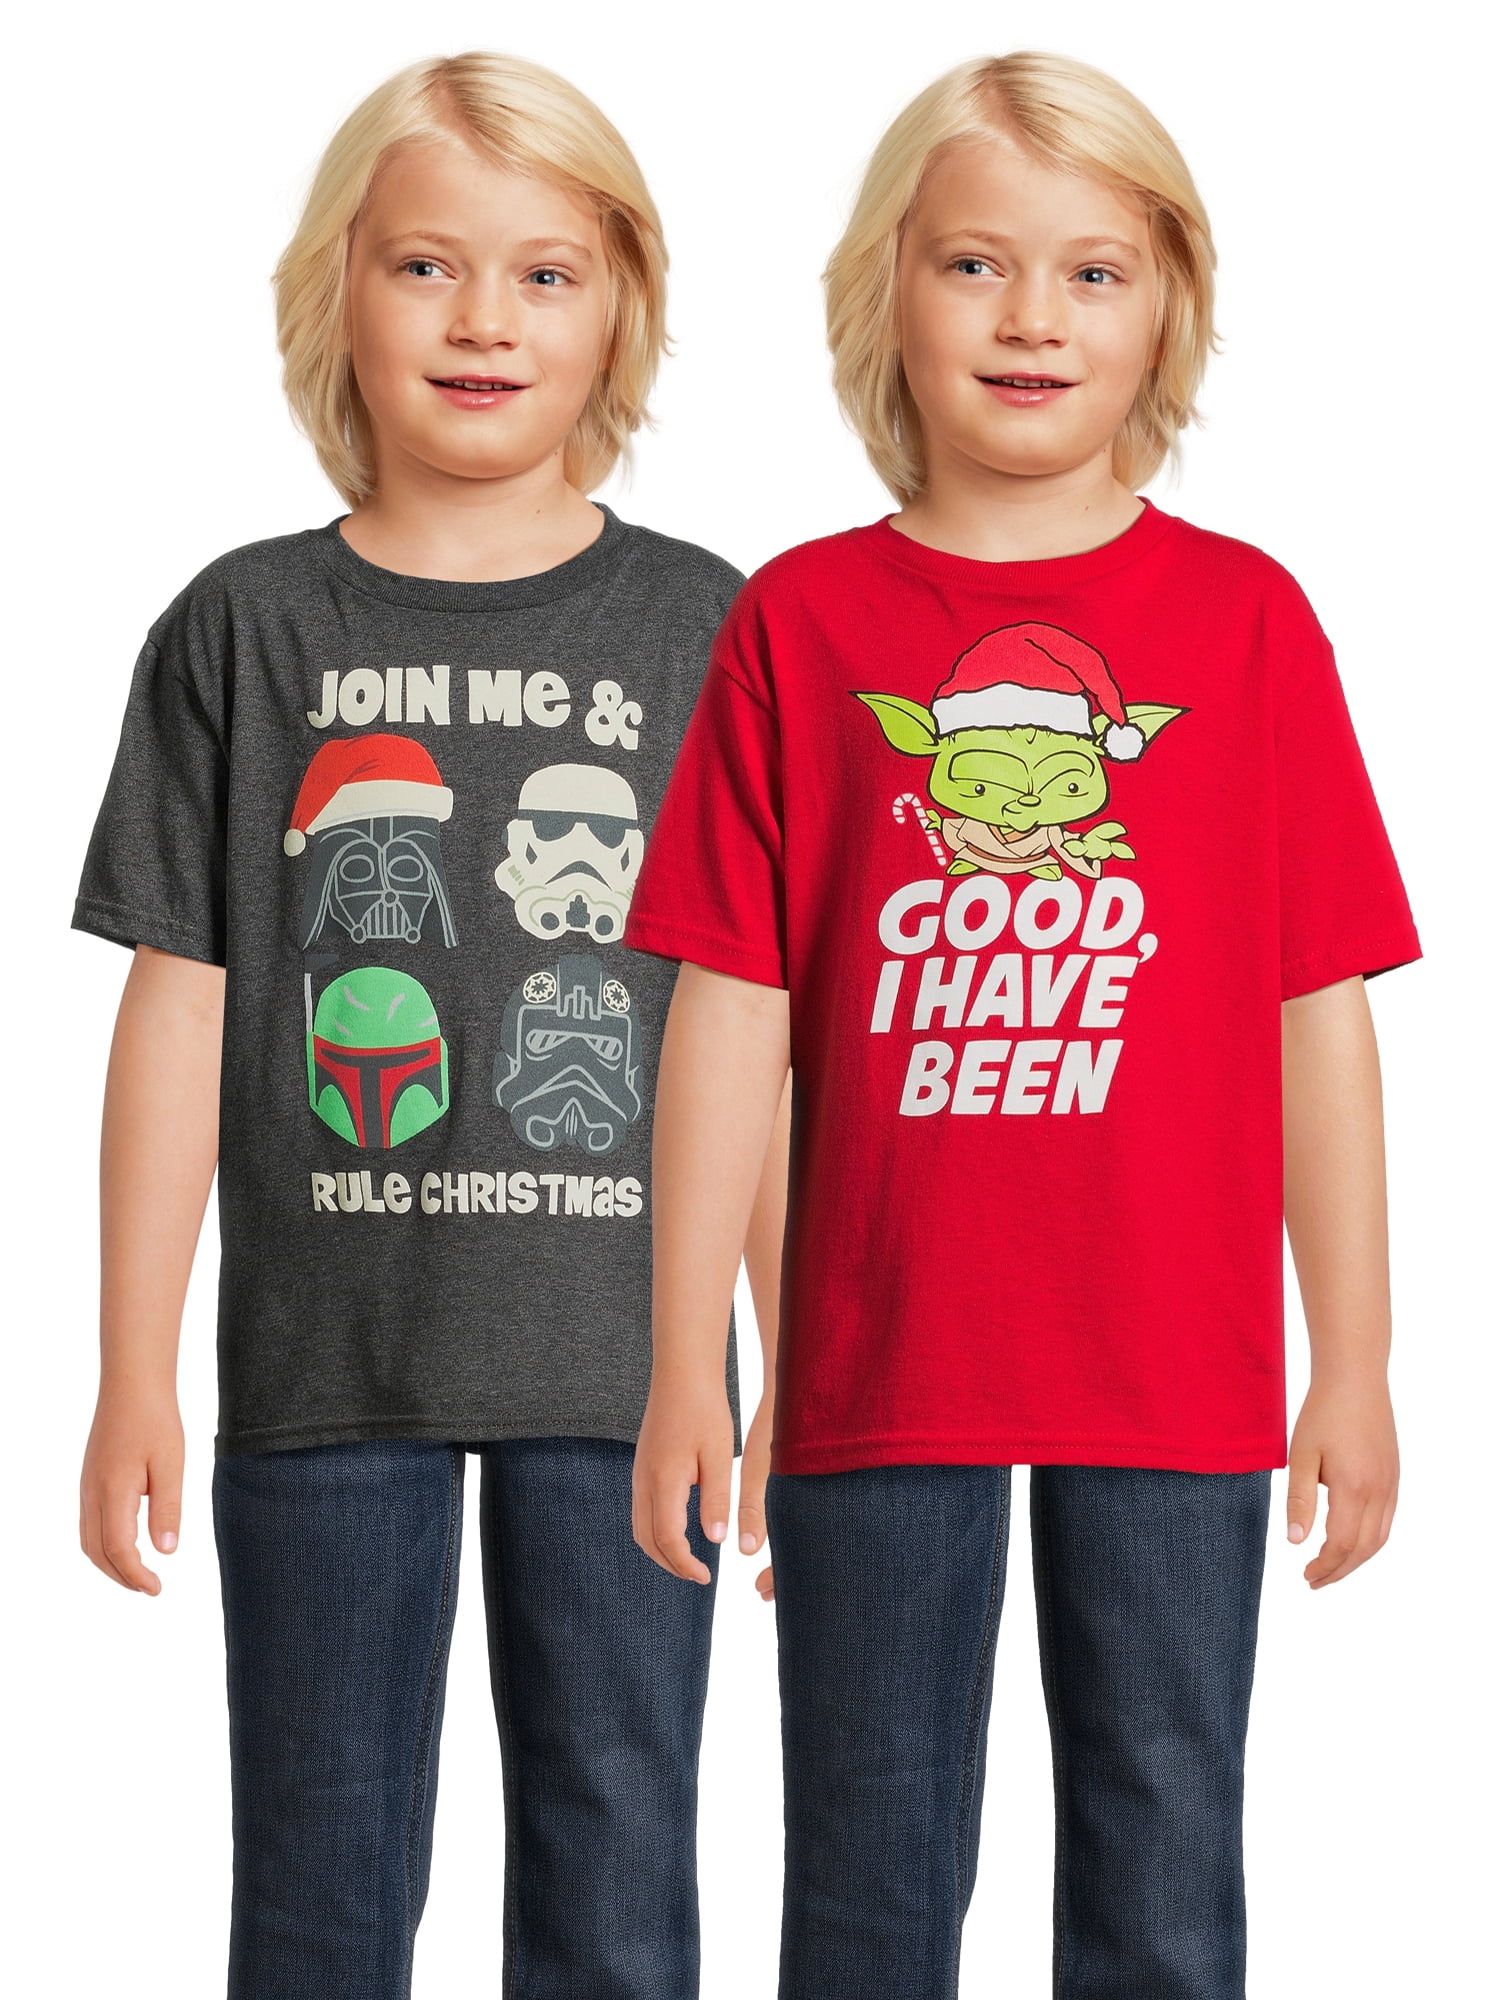 Tees Star Boys with Graphic 2-Pack, 4-18 Christmas Sizes Short Sleeves, Wars